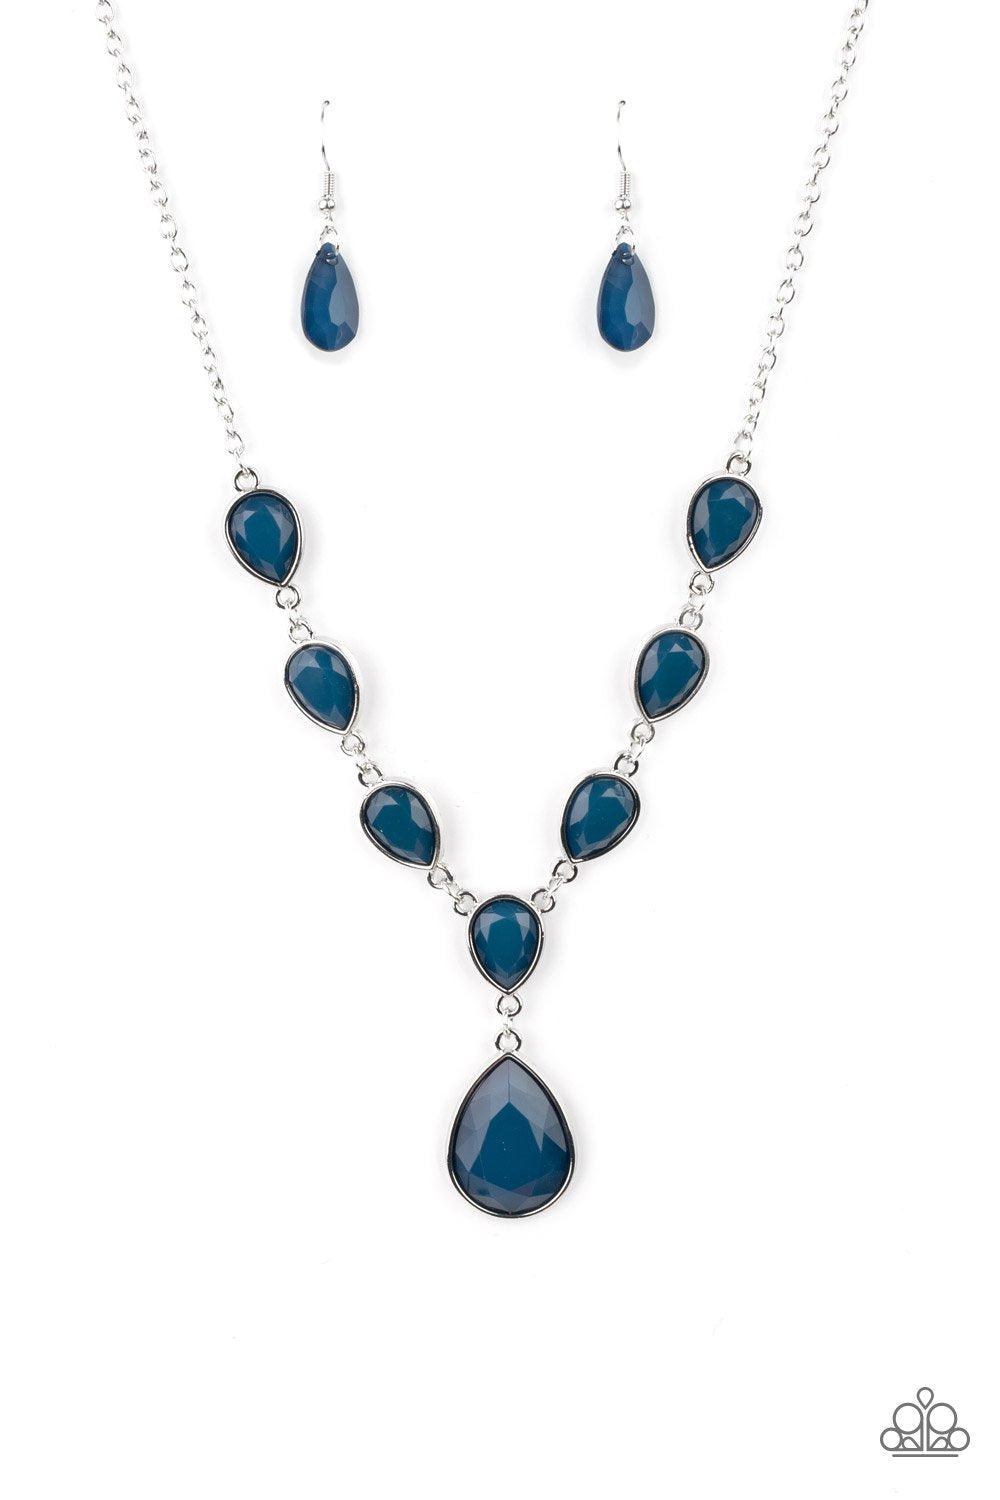 Party Paradise Blue Necklace - Paparazzi Accessories- lightbox - CarasShop.com - $5 Jewelry by Cara Jewels